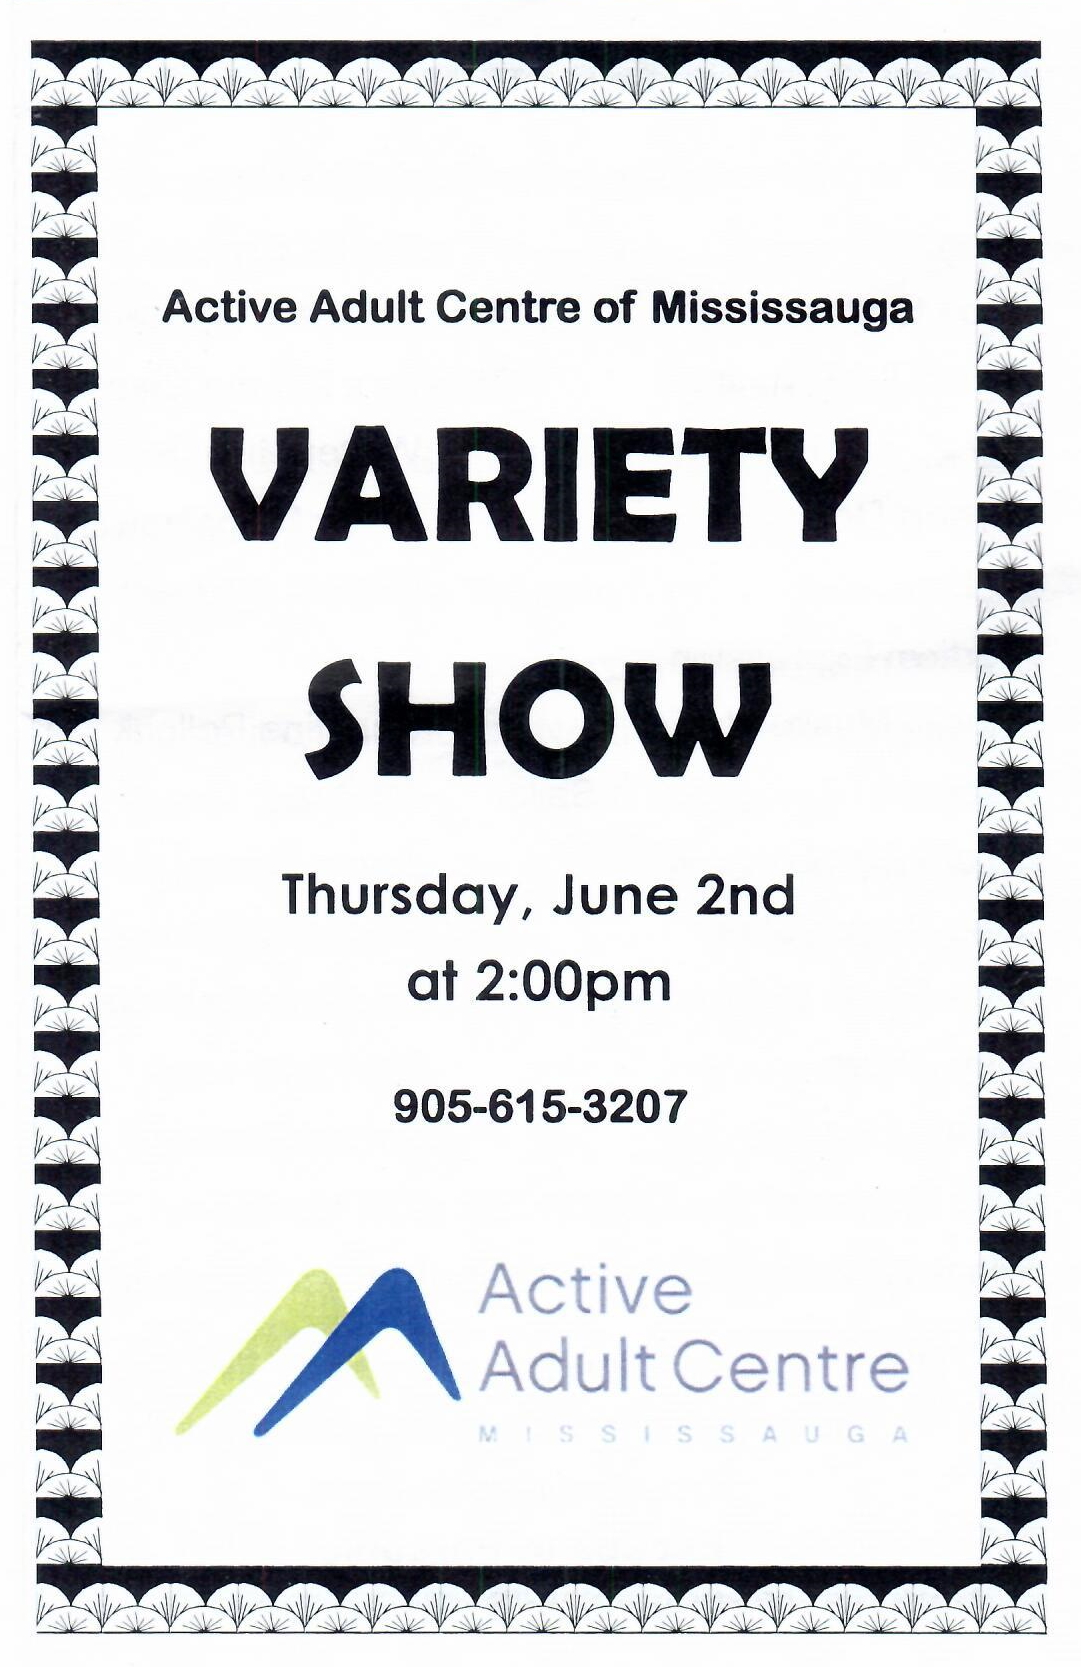 Variety Show Program Cover AAC Miss June 2, 2022